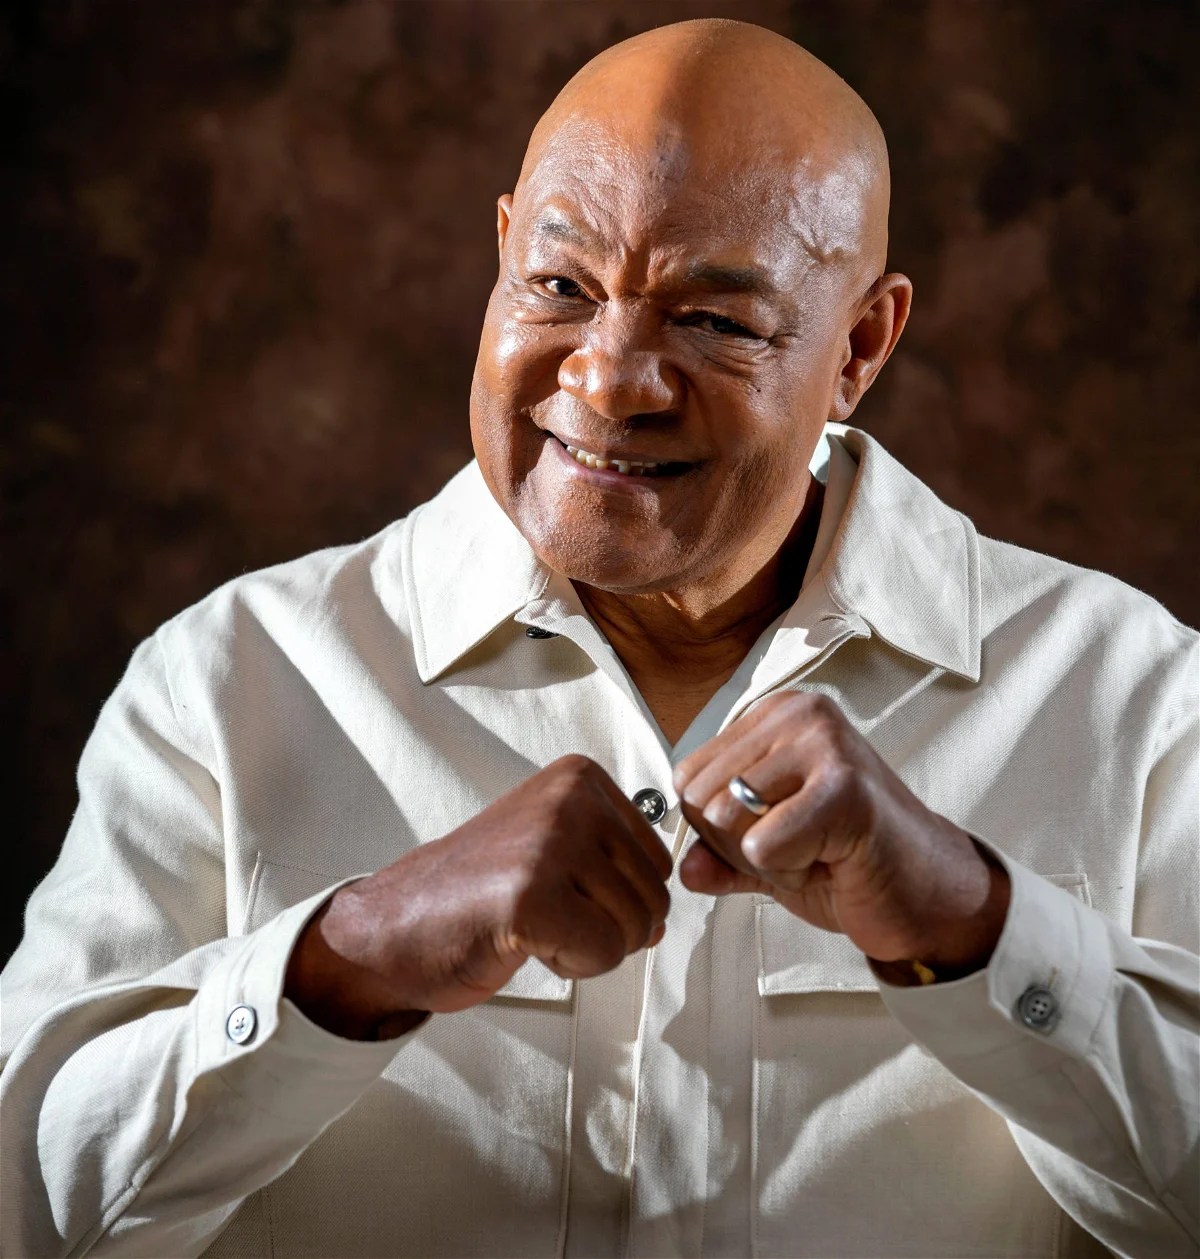 "That's How You Showcase Power" Boxing Legend Foreman Left